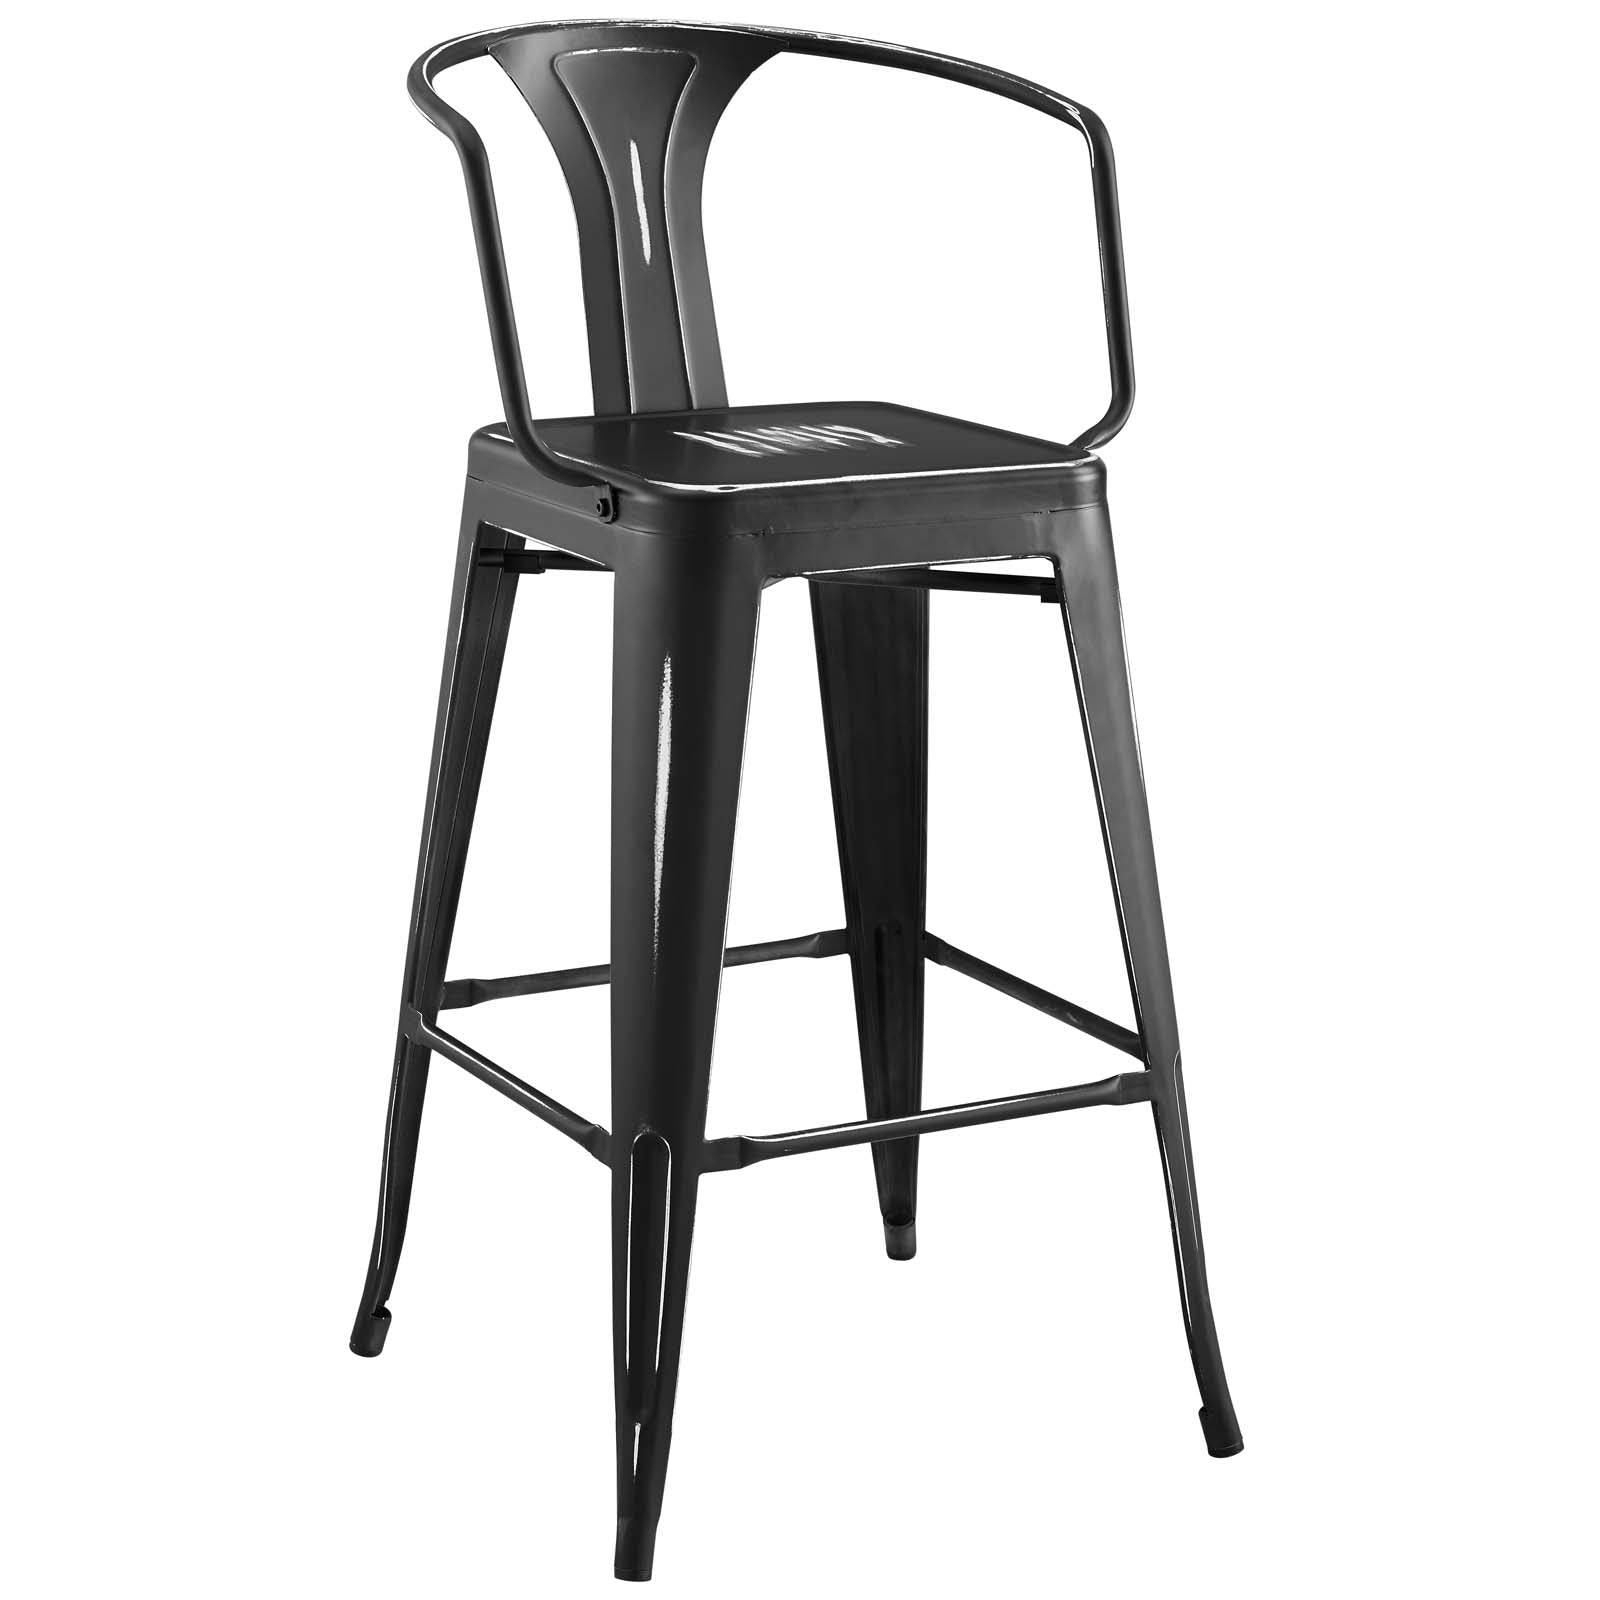 Industrial Promenade Bistro Bar Stool With Arms - Farmhouse Bar Chairs